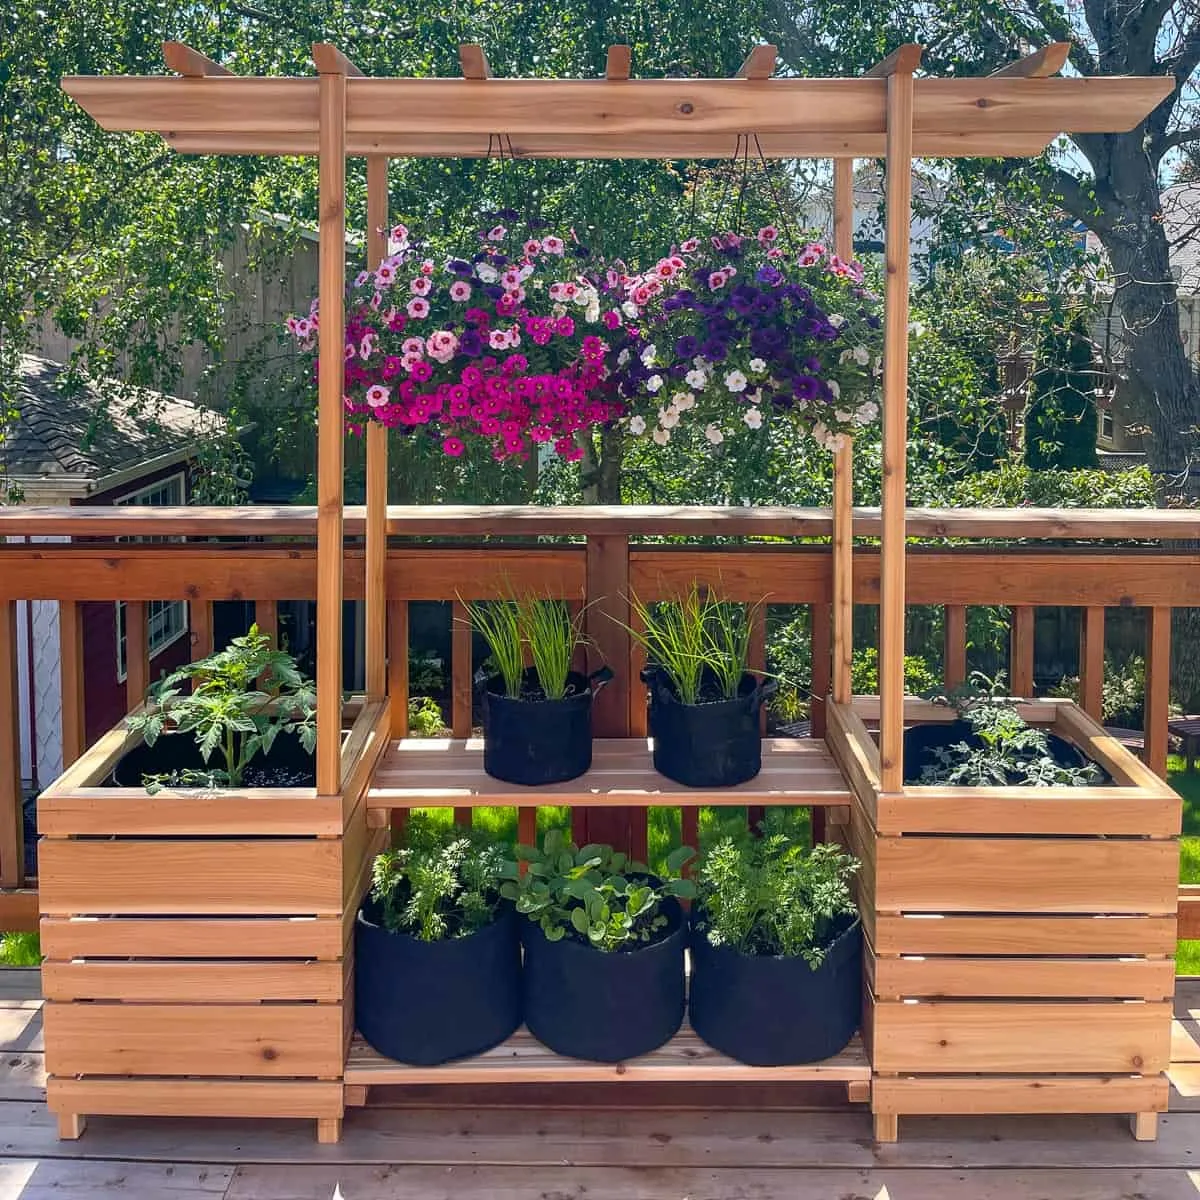 DIY outdoor plant stand with arbor, planter boxes and hanging baskets